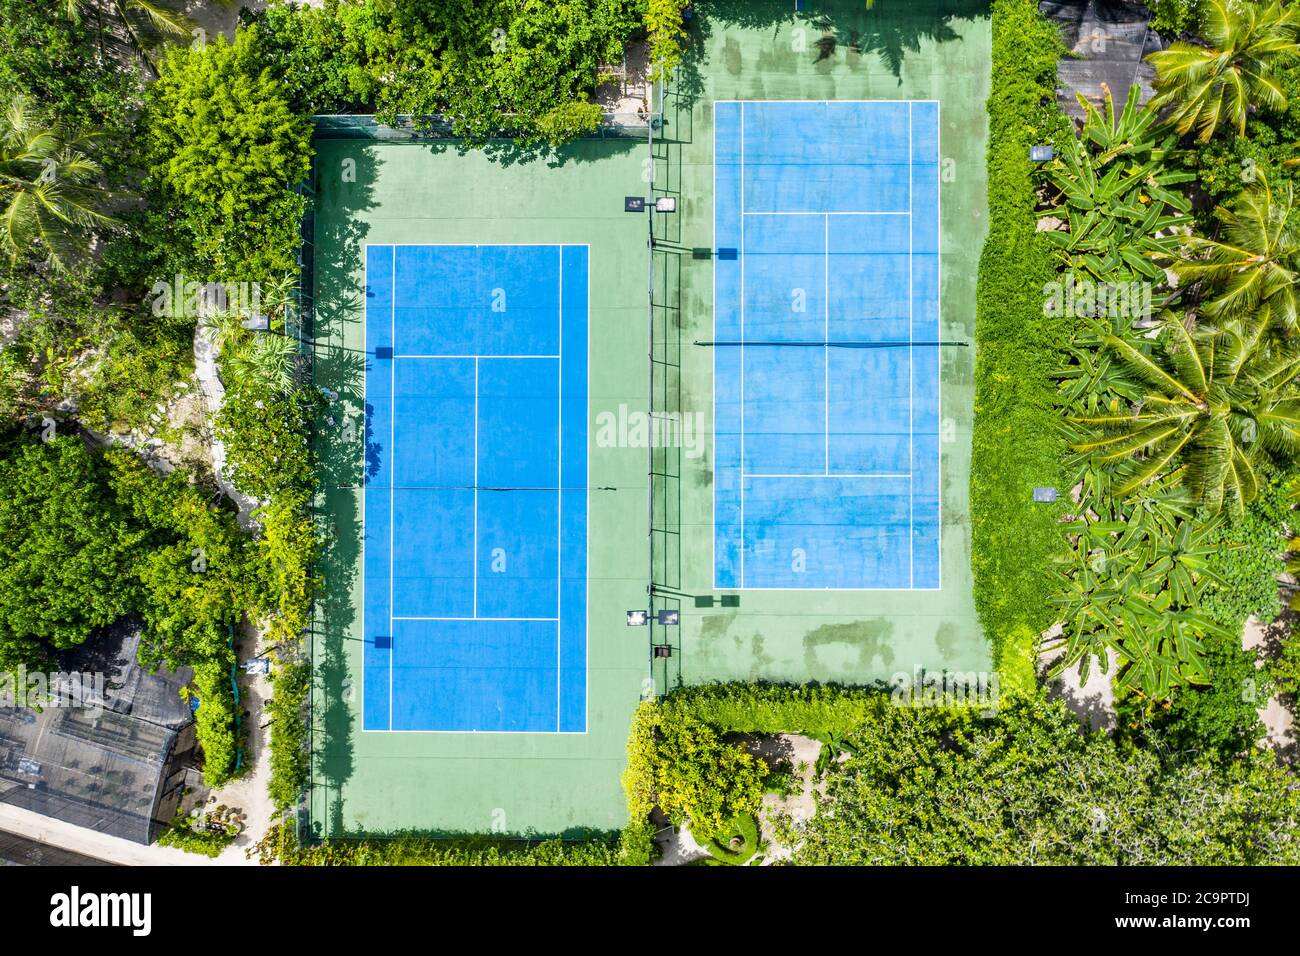 Amazing birds eye view of a tennis court surrounded by palm trees. Aerial tennis fields, outdoor sport and recreation concept Stock Photo